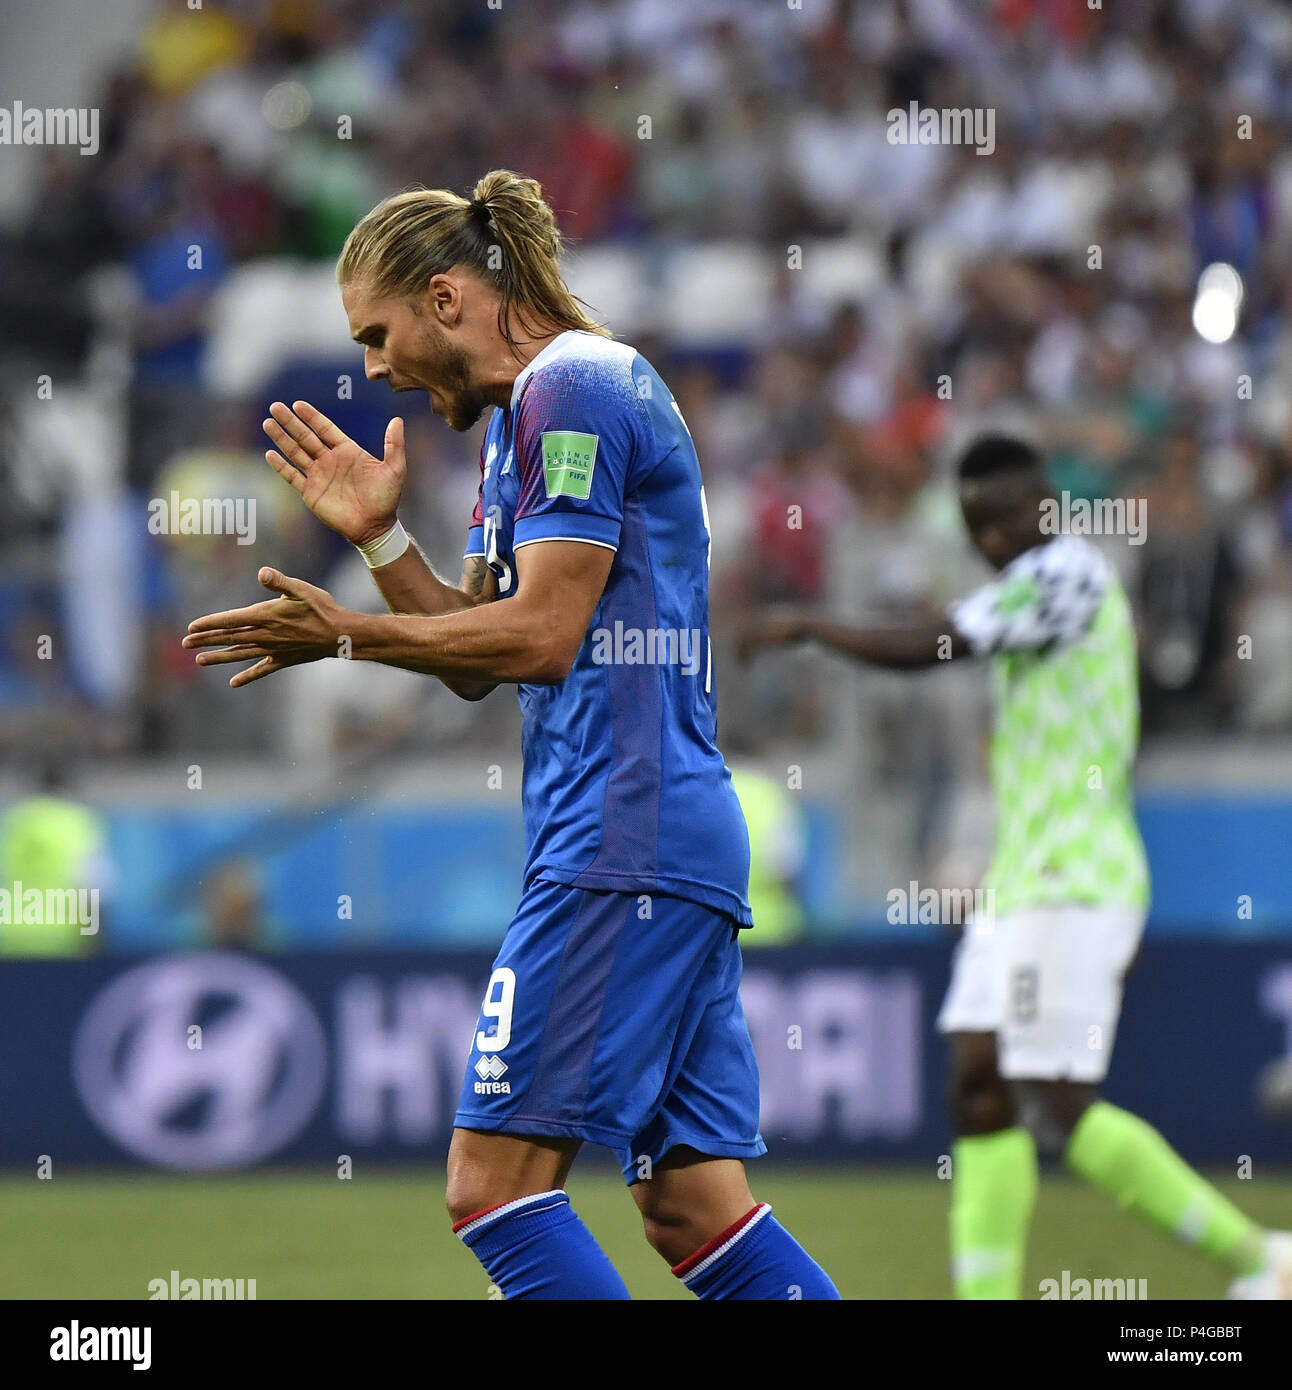 Volgograd Russia 22nd June 2018 Rurik Gislason Of Iceland Reacts During The 2018 Fifa World Cup Group D Match Between Nigeria And Iceland In Volgograd Russia June 22 2018 Nigeria Won 2 0